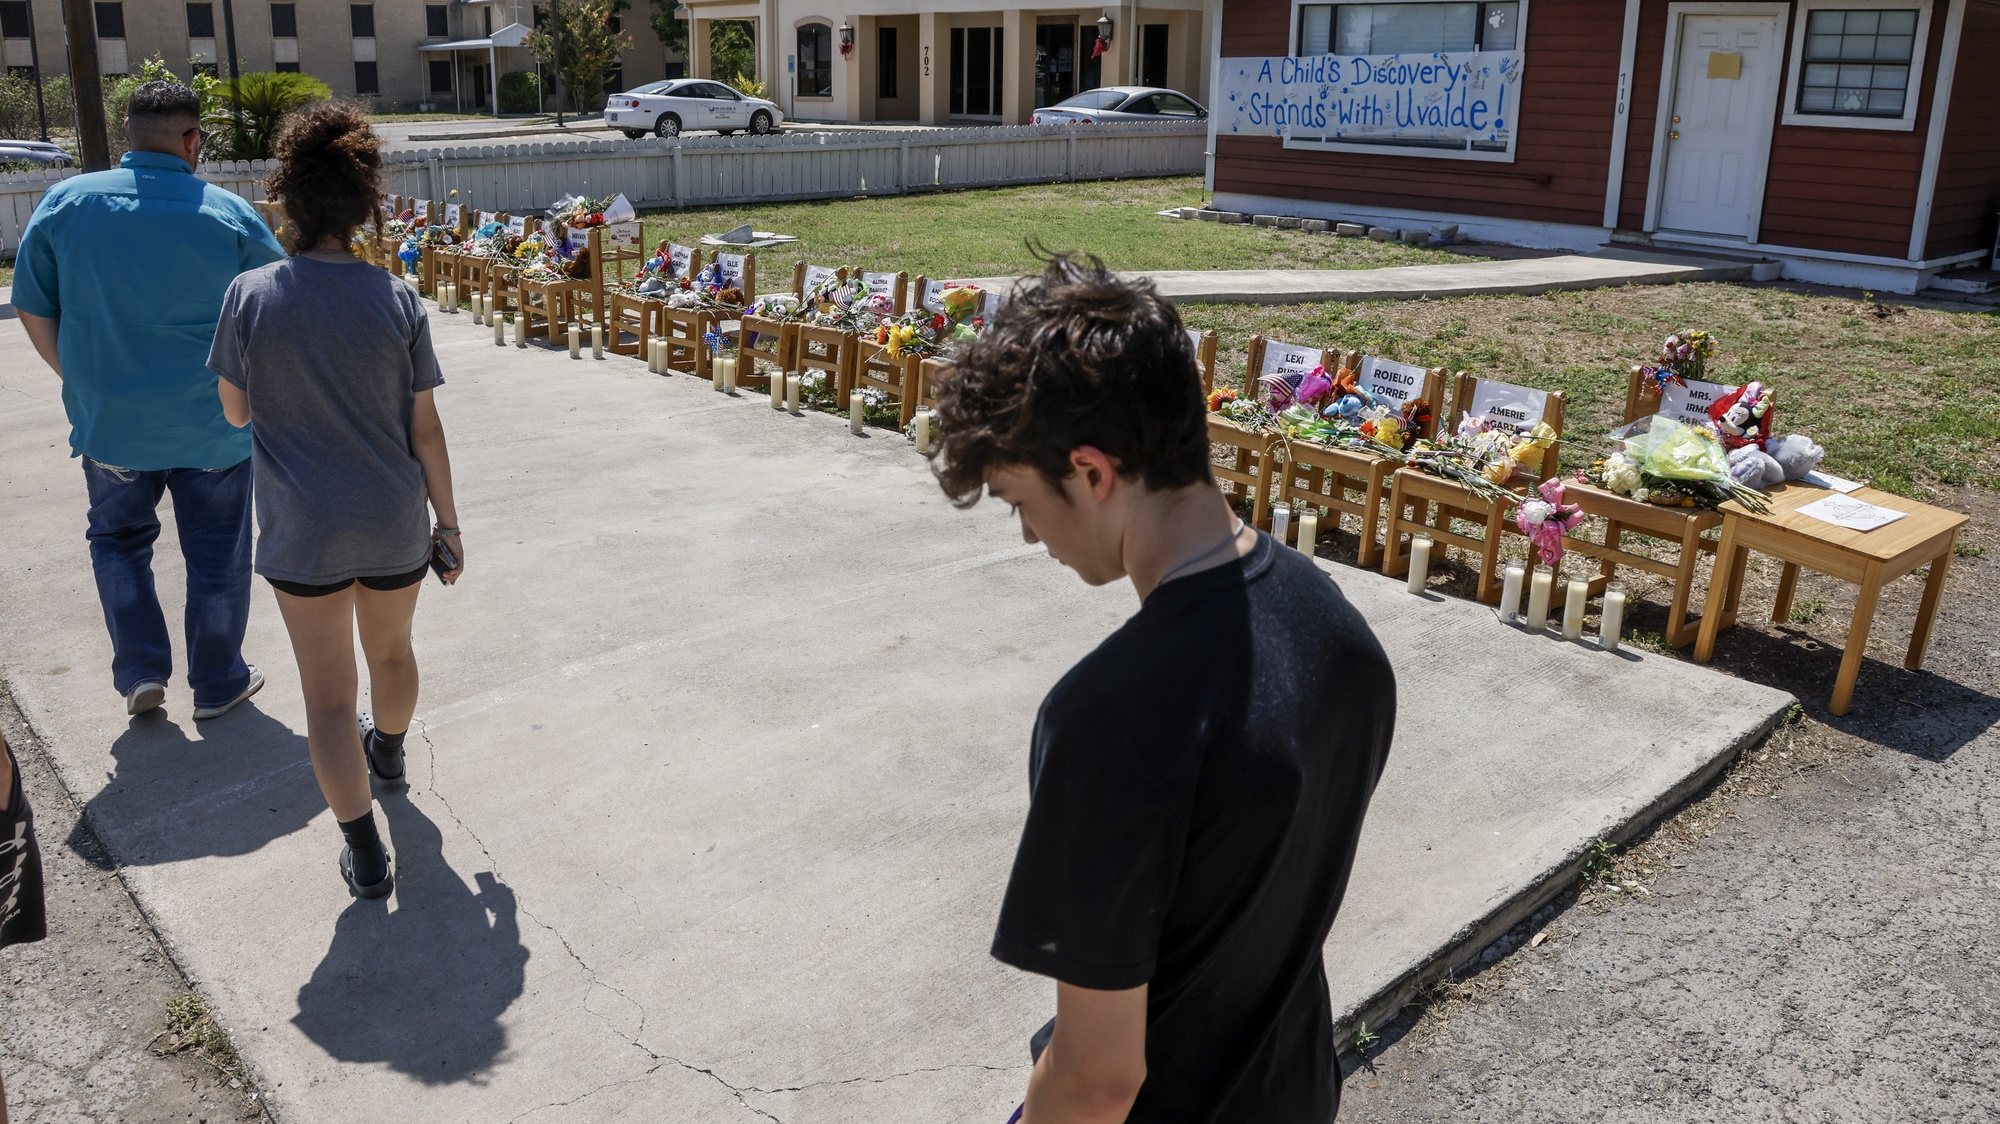 epa09985680 People continue to pay respect to the victims at a Uvalde day care center where chairs represent each victim as a memorial following the shooting at Robb Elementary School in Uvalde, Texas, USA, 29 May 2022. According to Texas officials, at least 19 children and two adults were killed in the shooting on 24 May. The eighteen-year-old gunman was killed by responding officers.  EPA/TANNEN MAURY